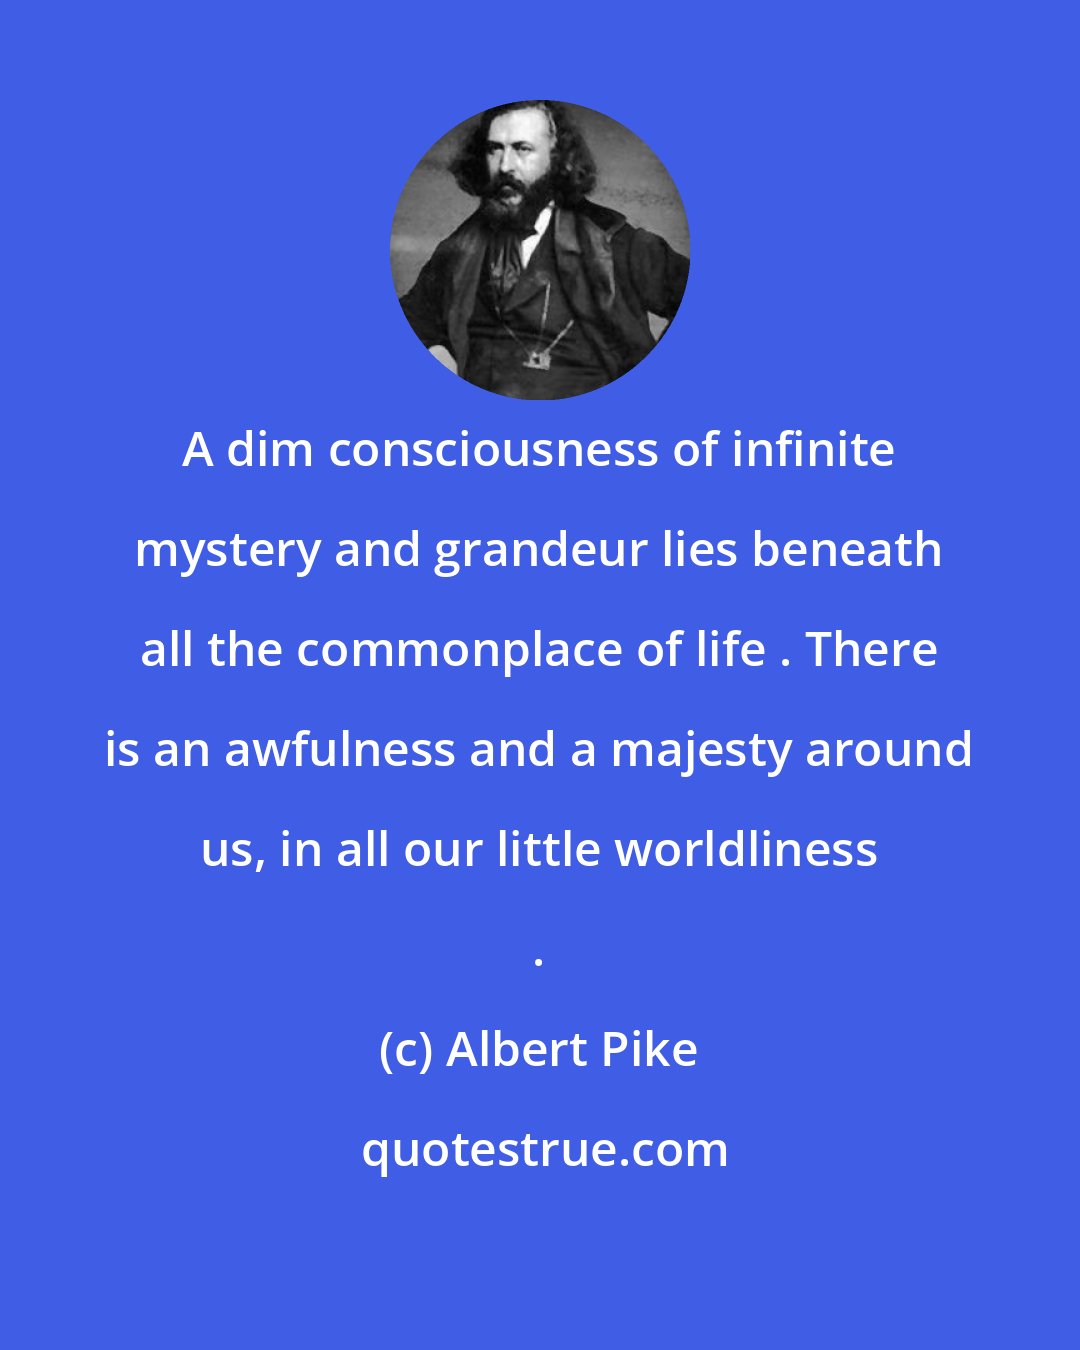 Albert Pike: A dim consciousness of infinite mystery and grandeur lies beneath all the commonplace of life . There is an awfulness and a majesty around us, in all our little worldliness .